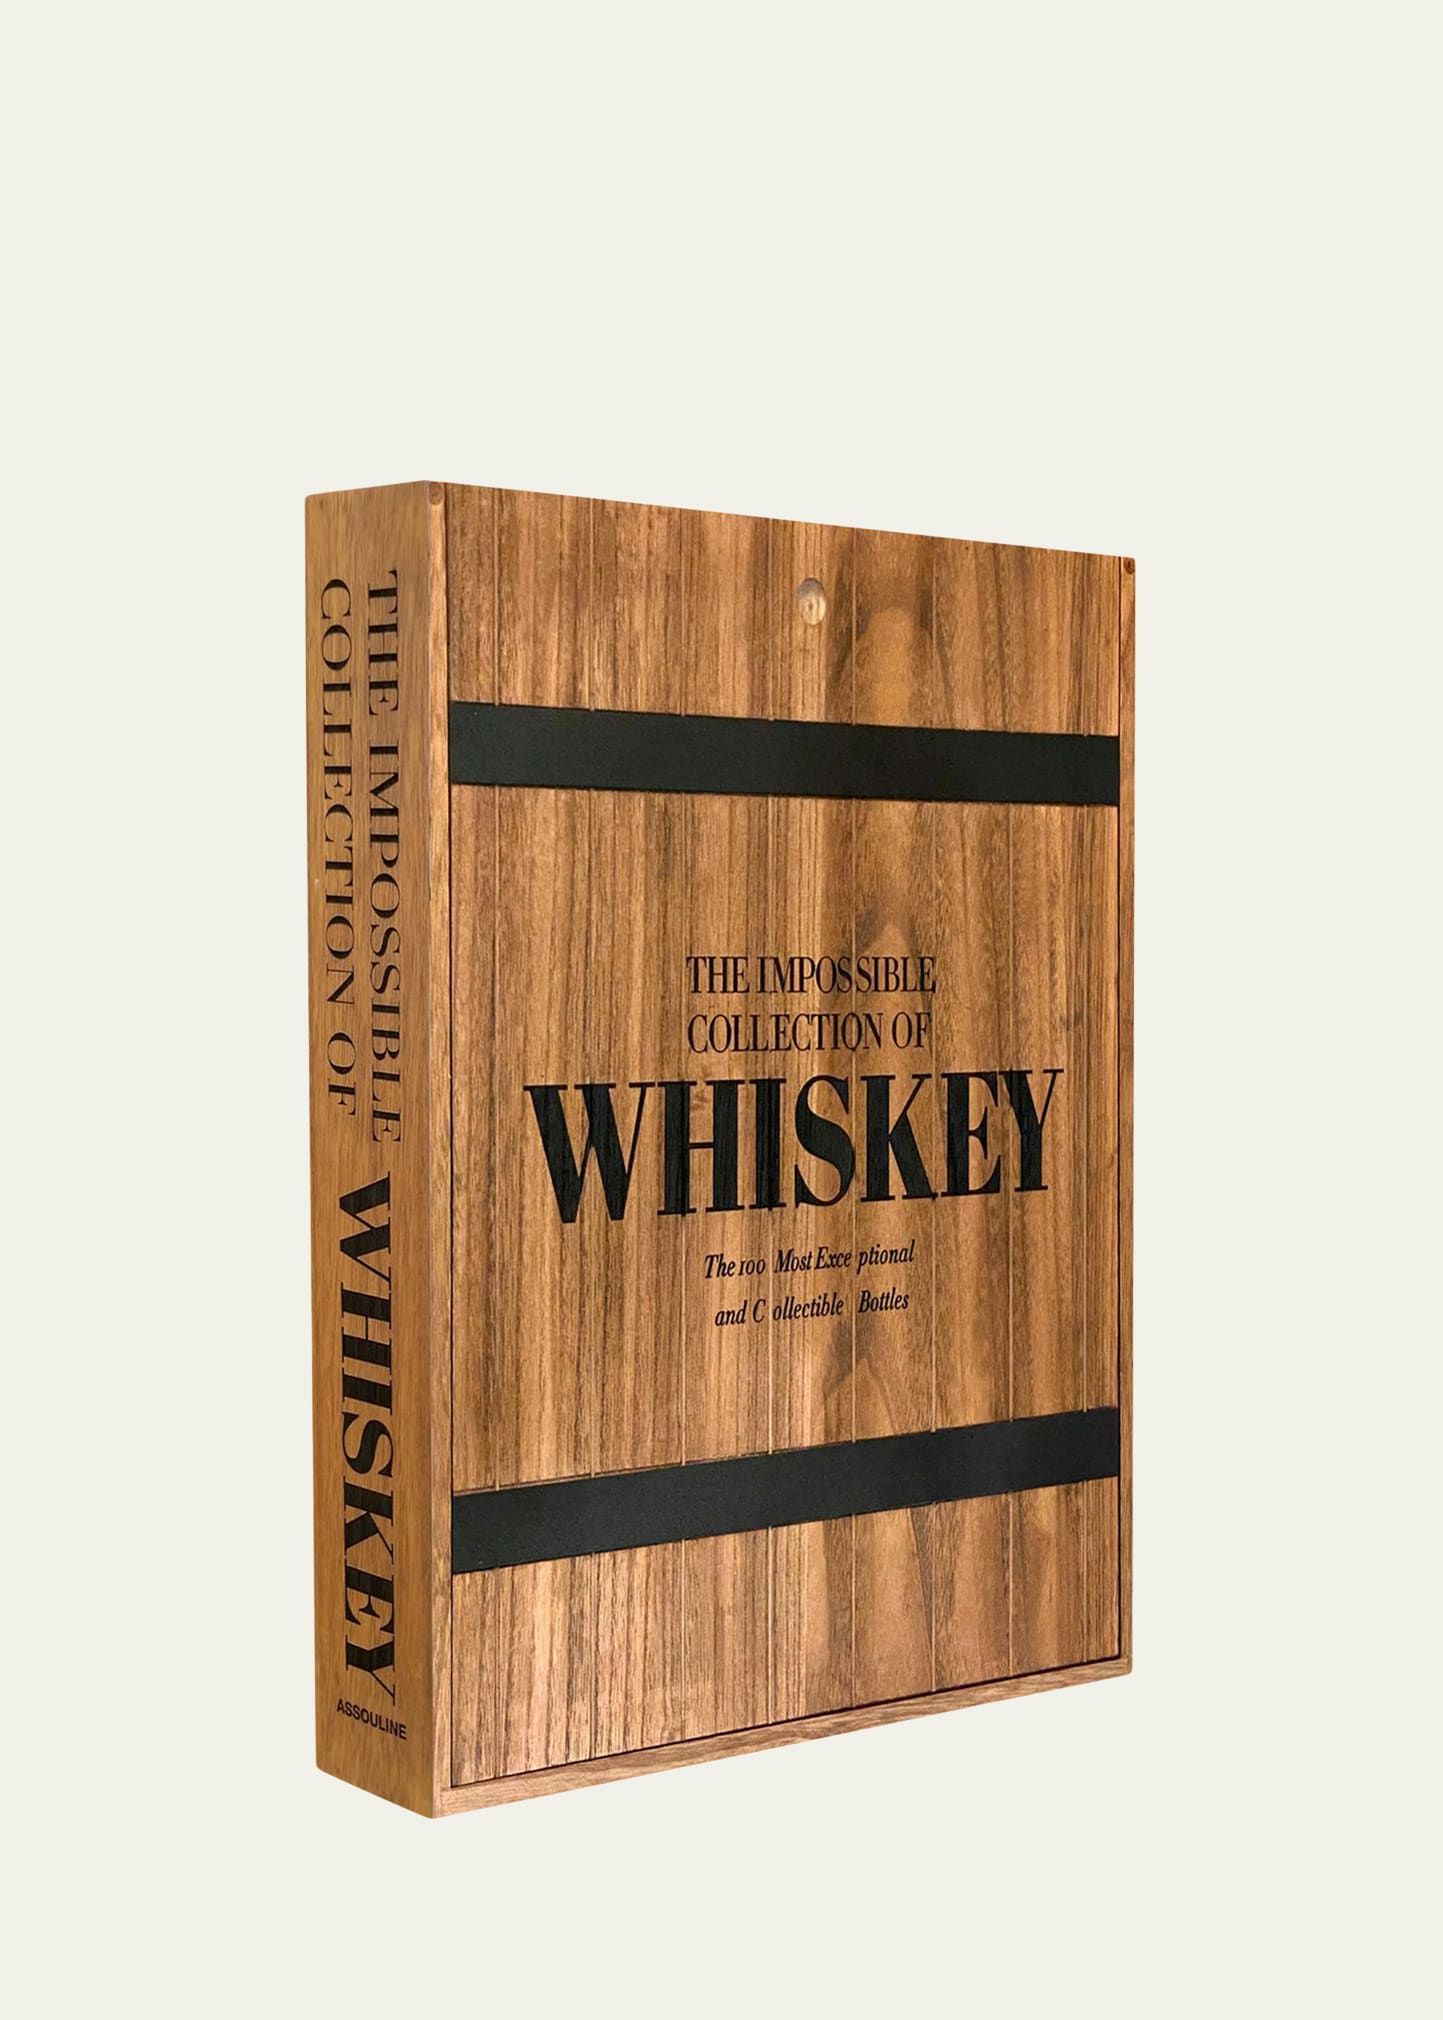 "The Impossible Collection of Whiskey" Book